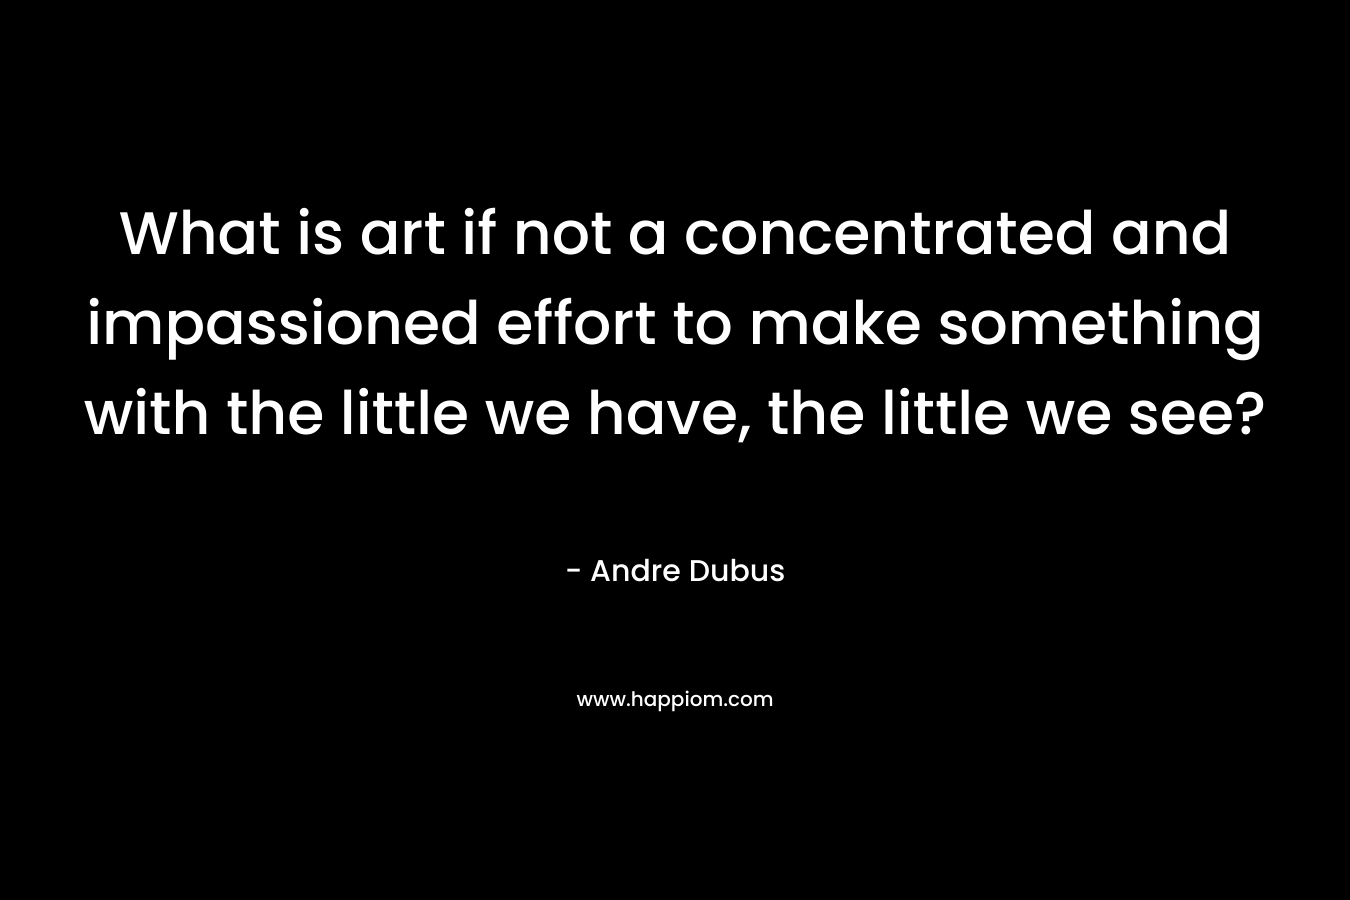 What is art if not a concentrated and impassioned effort to make something with the little we have, the little we see? – Andre Dubus